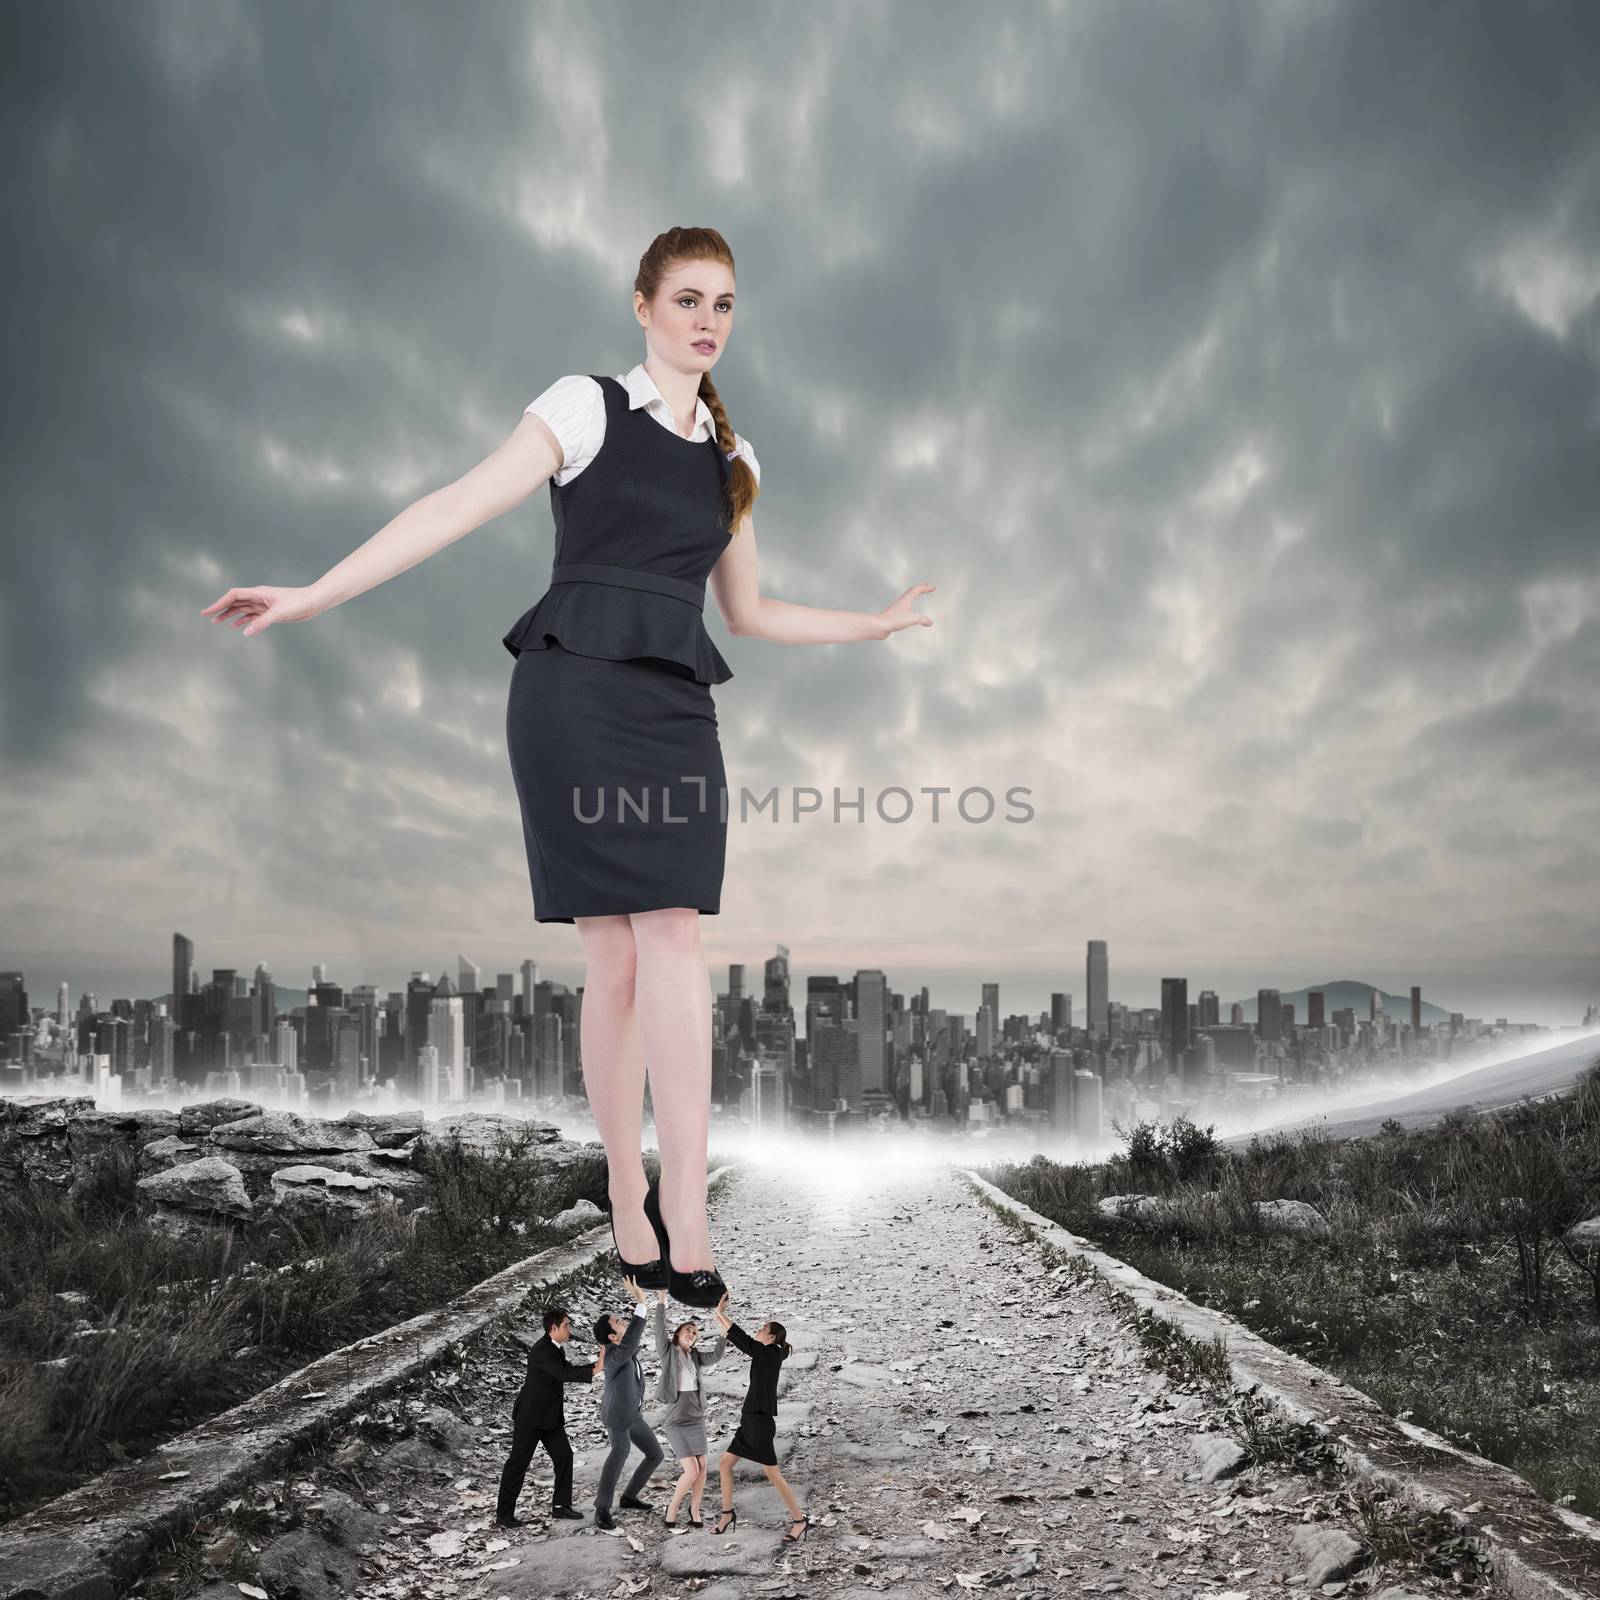 Business team supporting boss against stony path leading to large city on the horizon